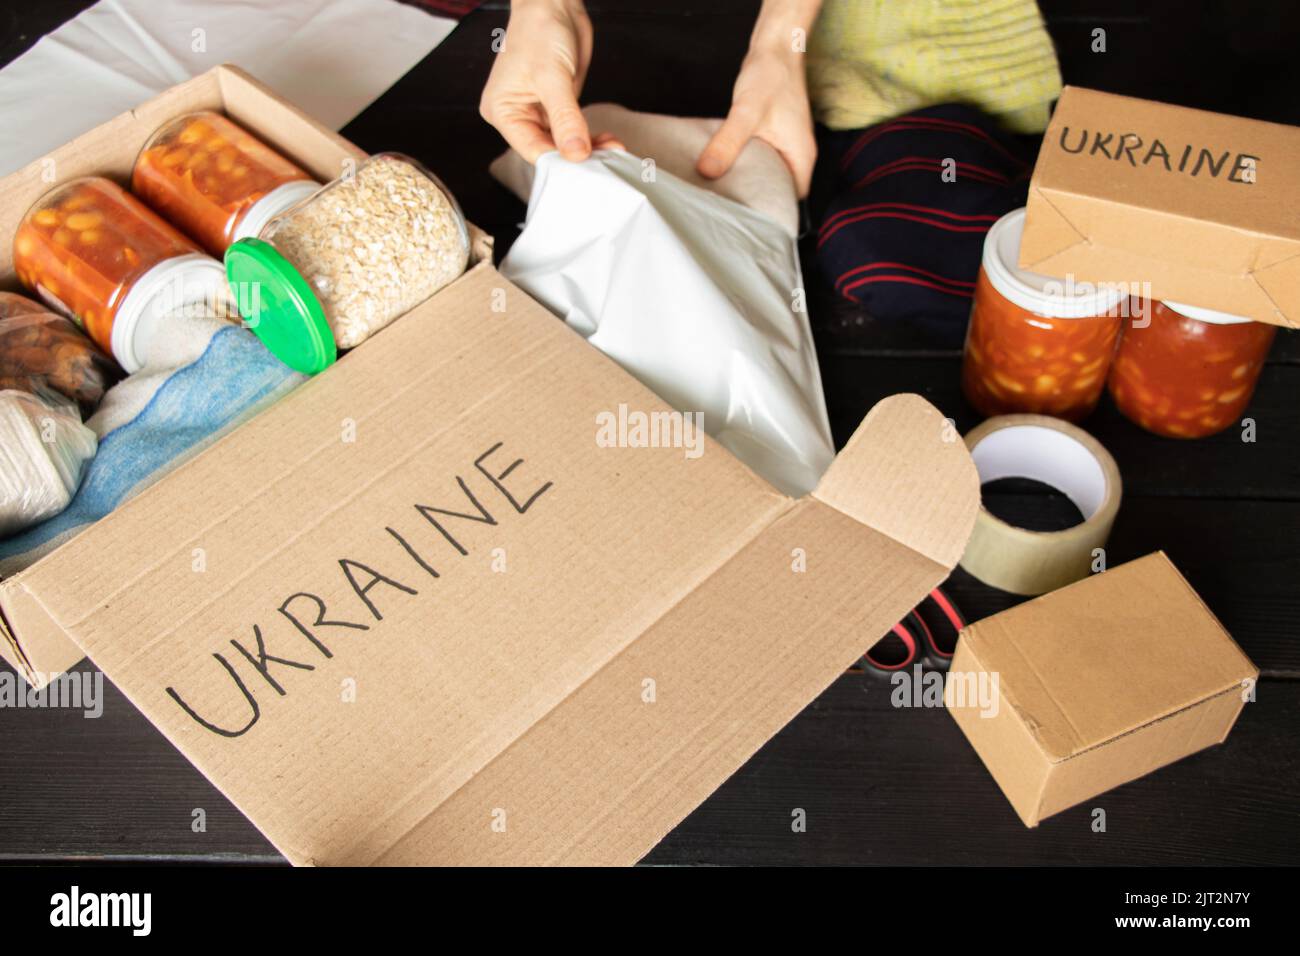 Collecting a humanitarian food set to help people who suffered during the war at the hands of Russia, stop the war in Ukraine, humanitarian aid 2022 Stock Photo